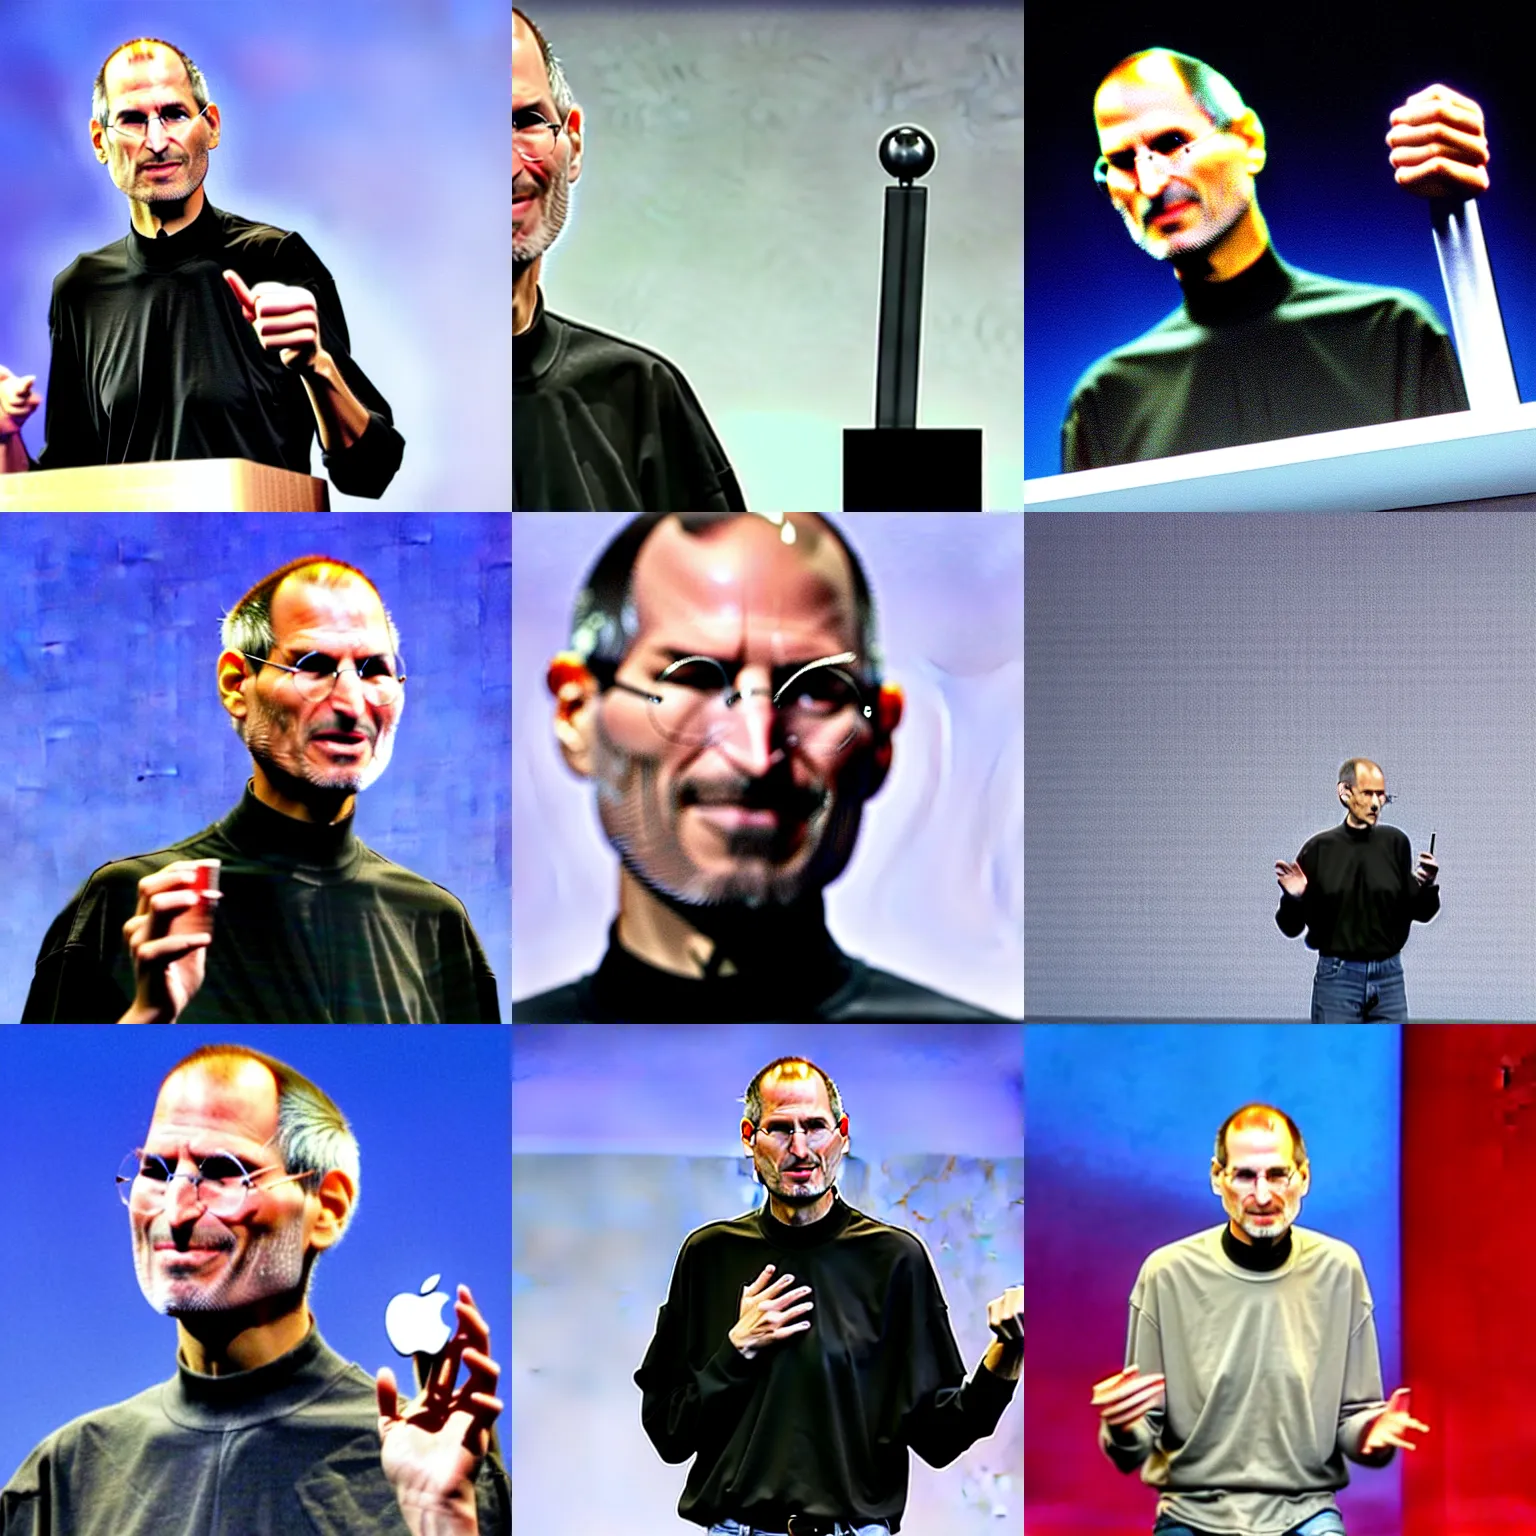 Prompt: still of steve jobs introducing the iplunger on stage, apple press conference, apple plunger device